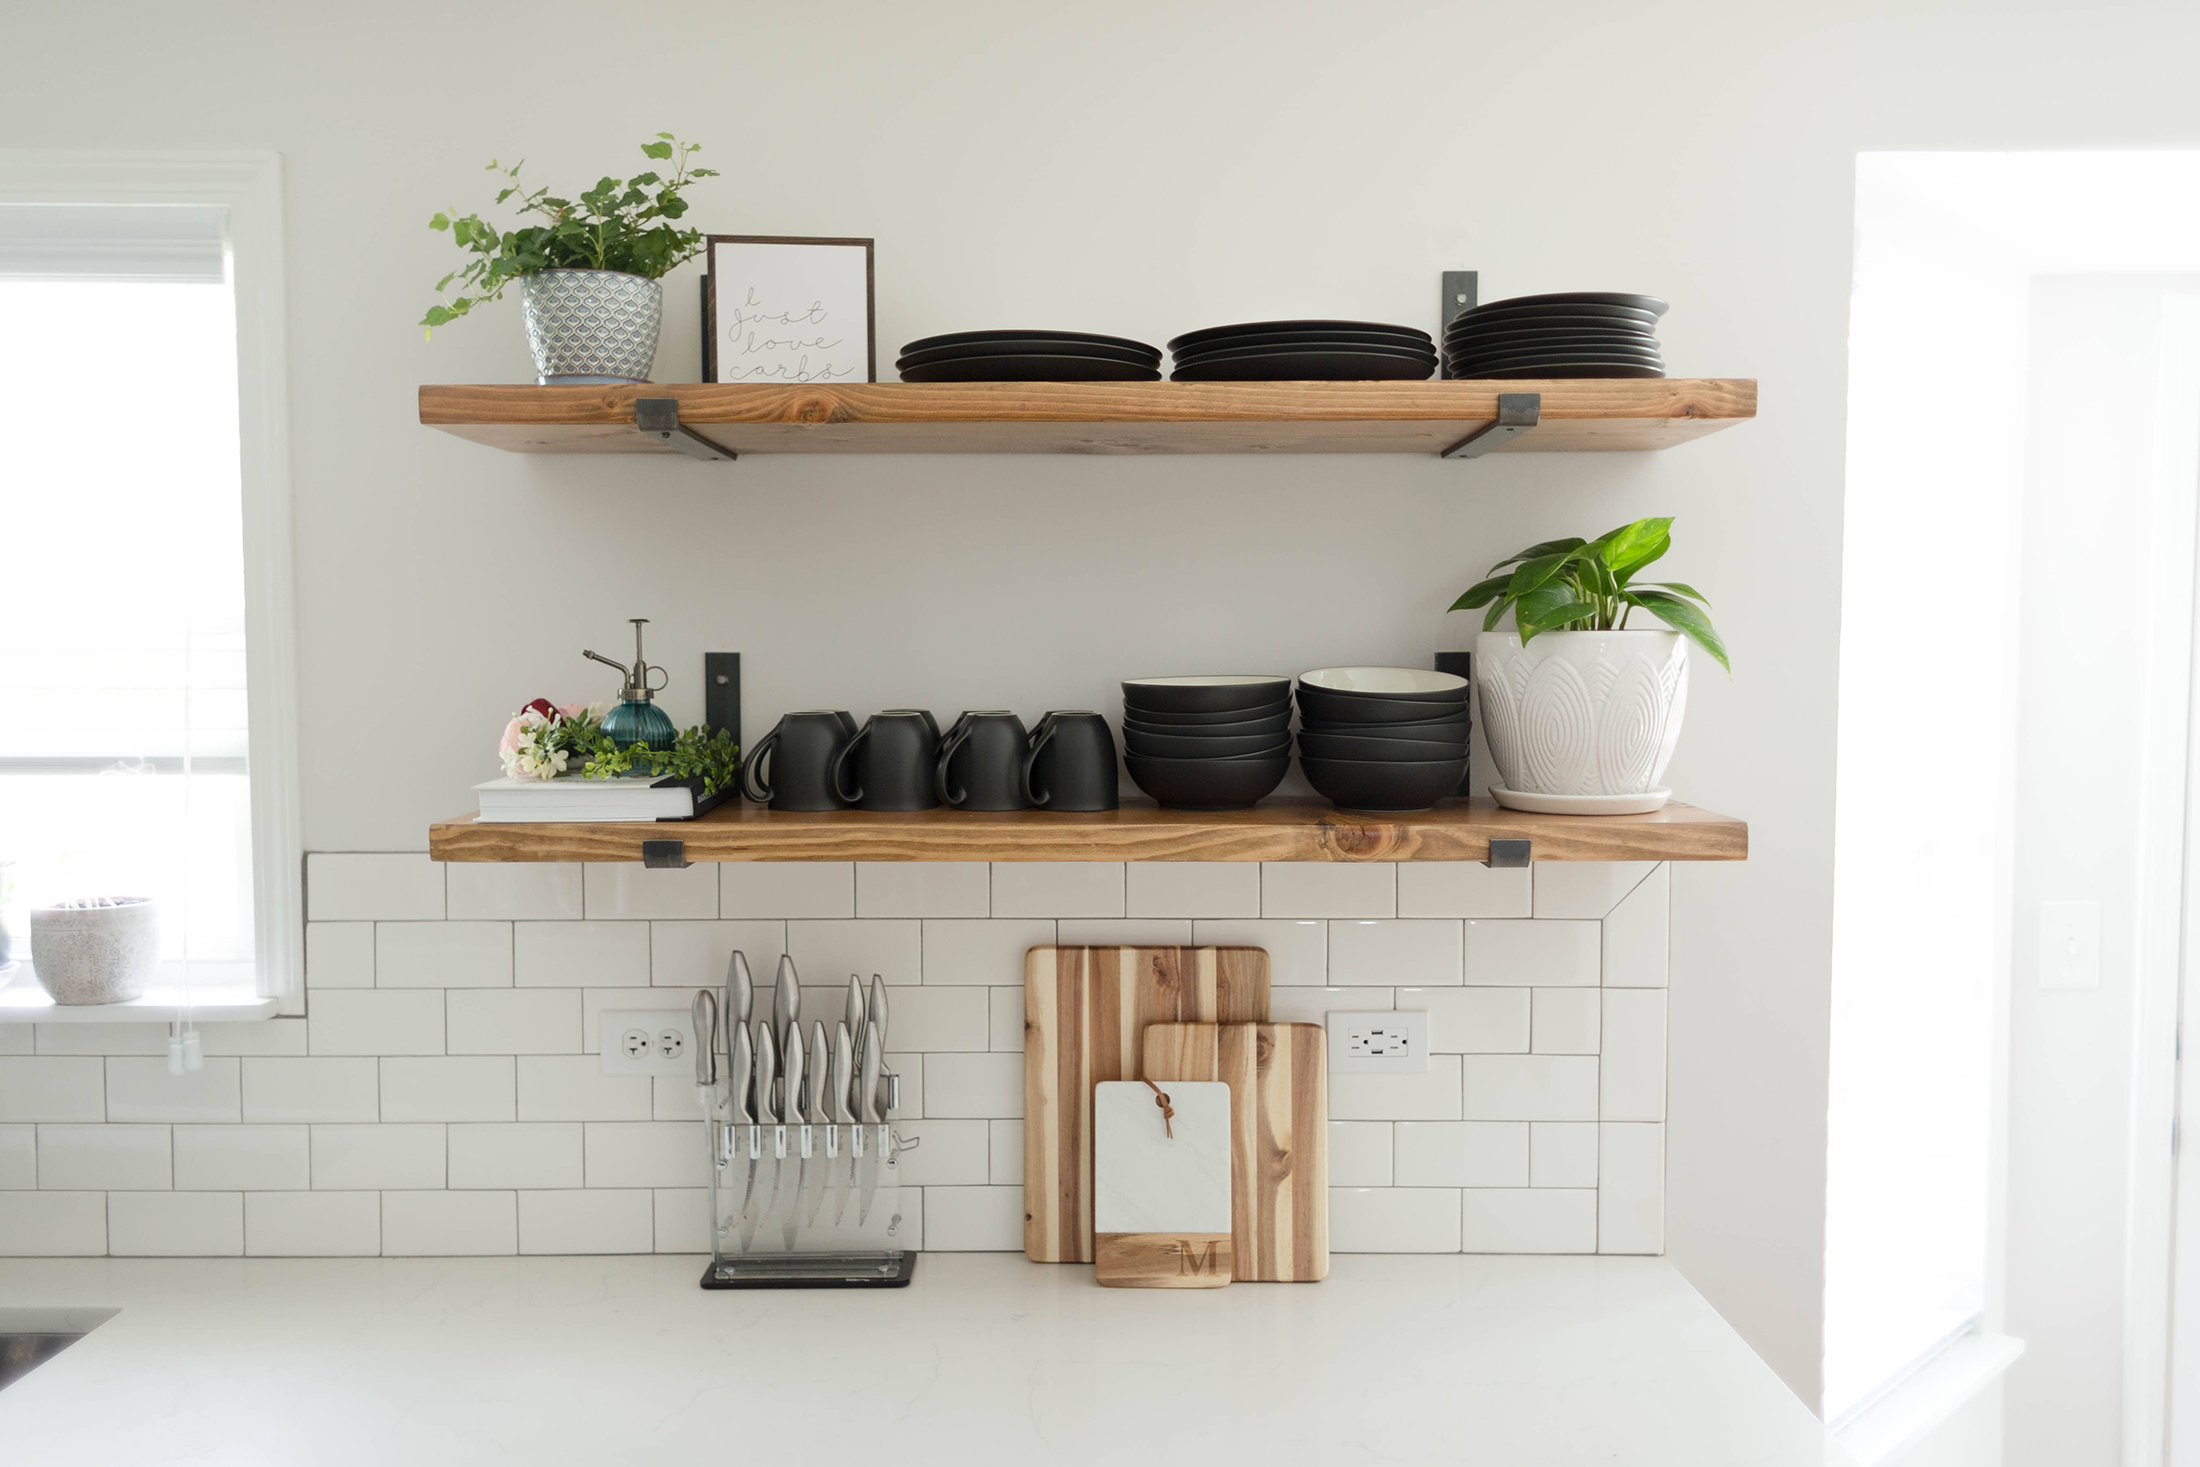 Diy Kitchen Open Shelving Sammy On State, What To Place On Open Kitchen Shelves